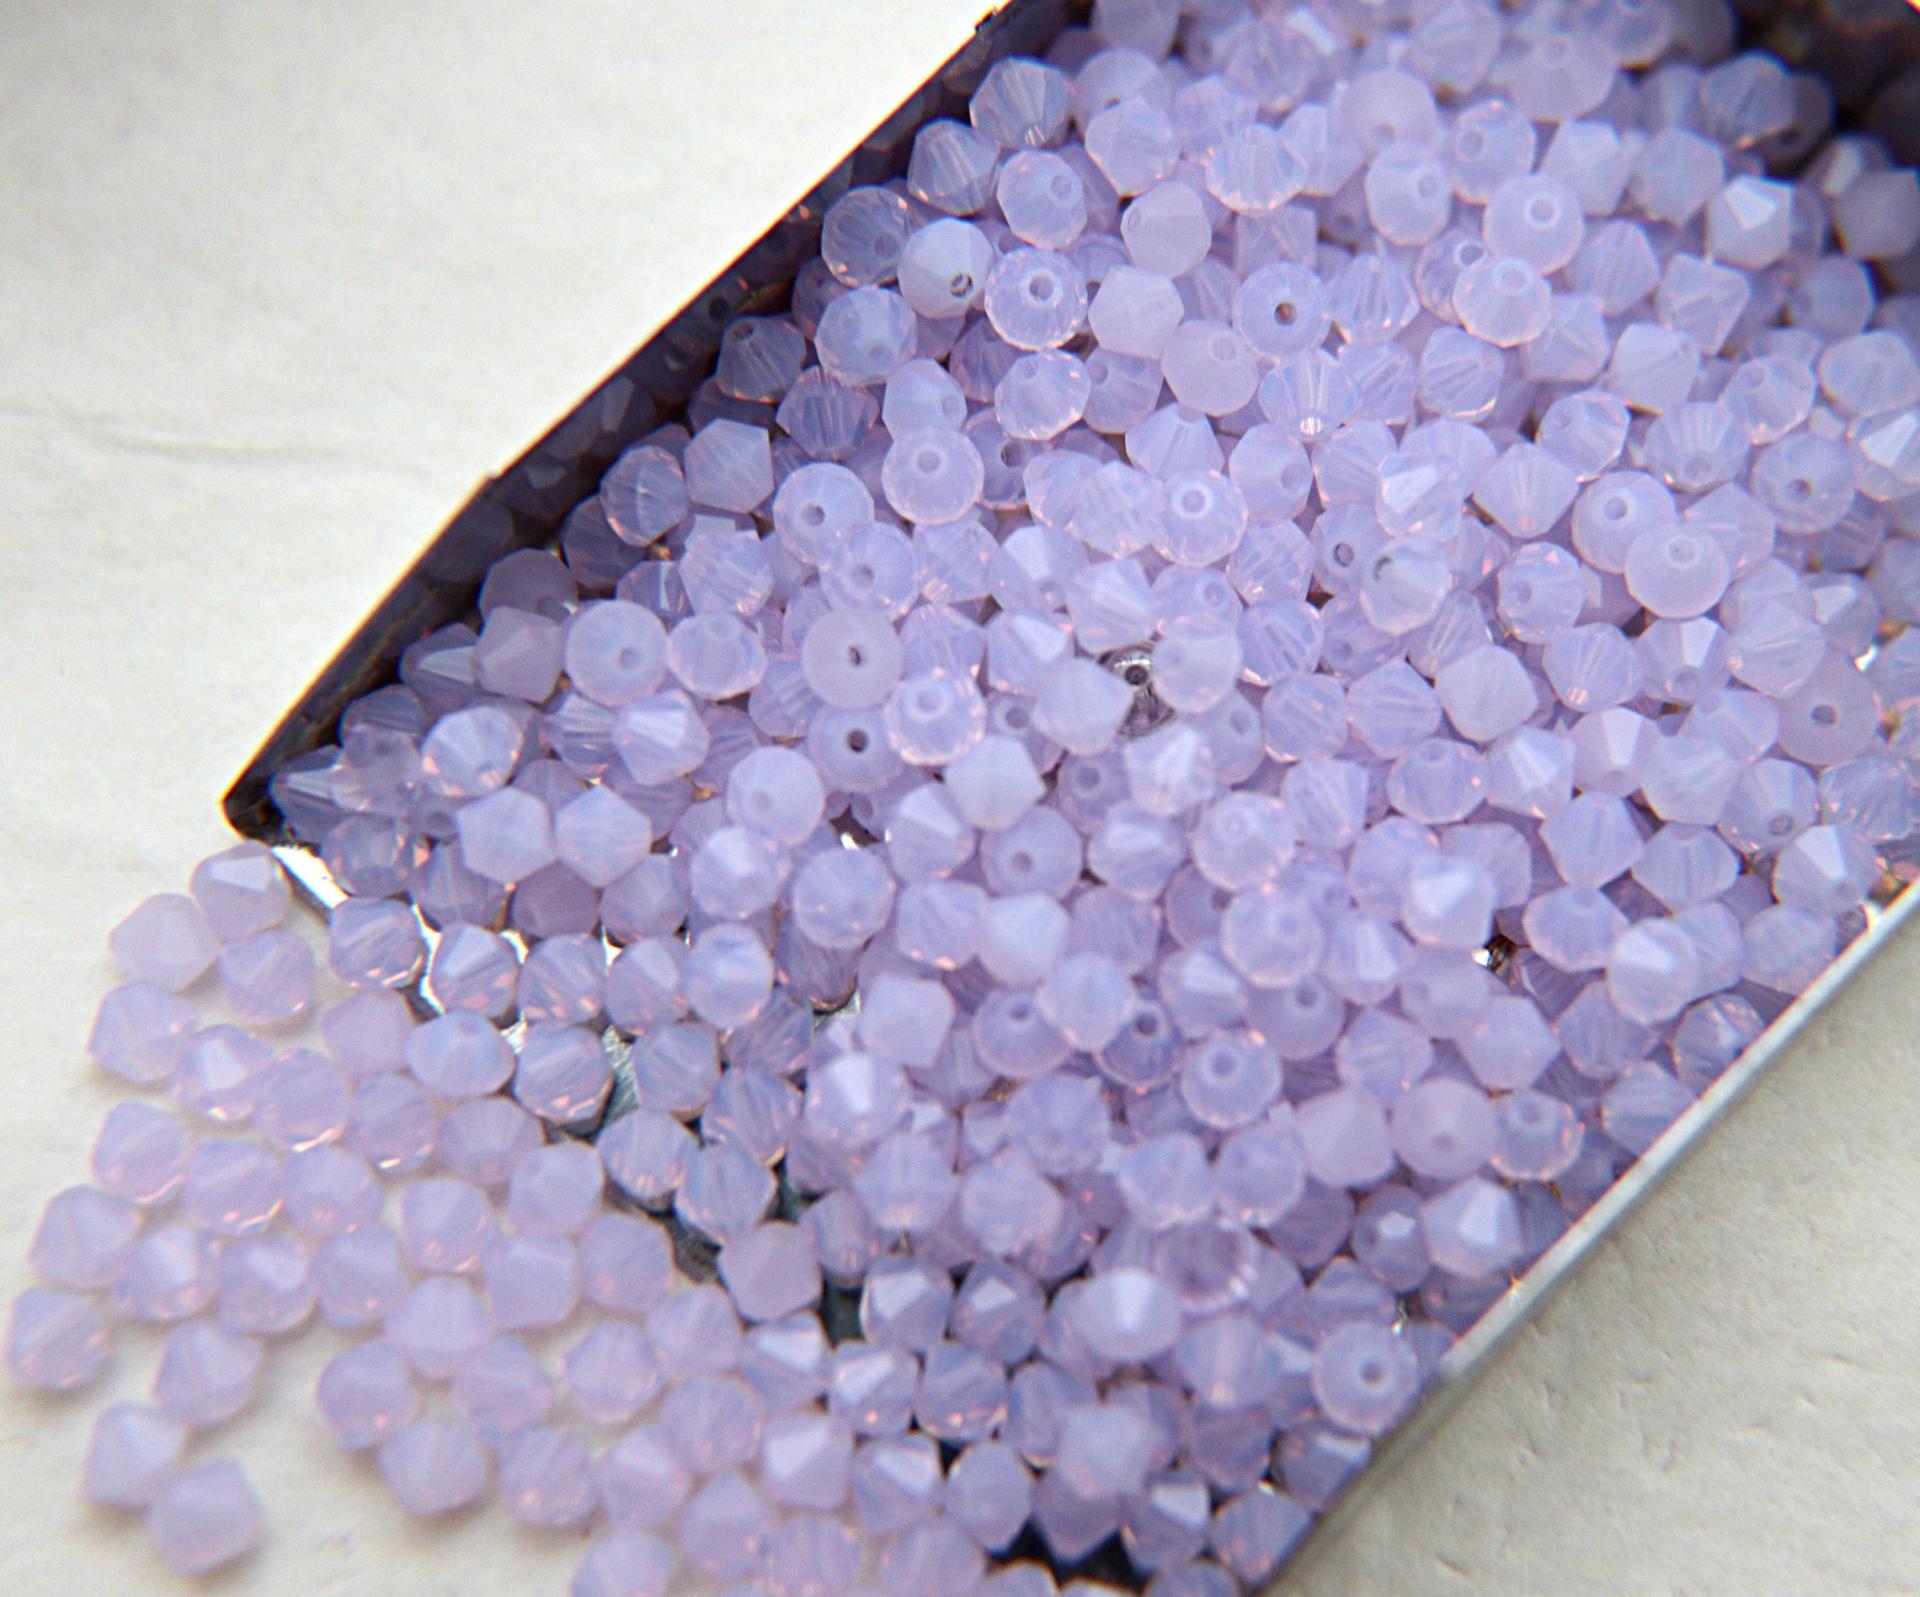 4mm Violet Opal Swarovski Bicone Beads 36/72/144/360/720 Pieces (389) jewelry beads, embellishment couture, embroidery materials